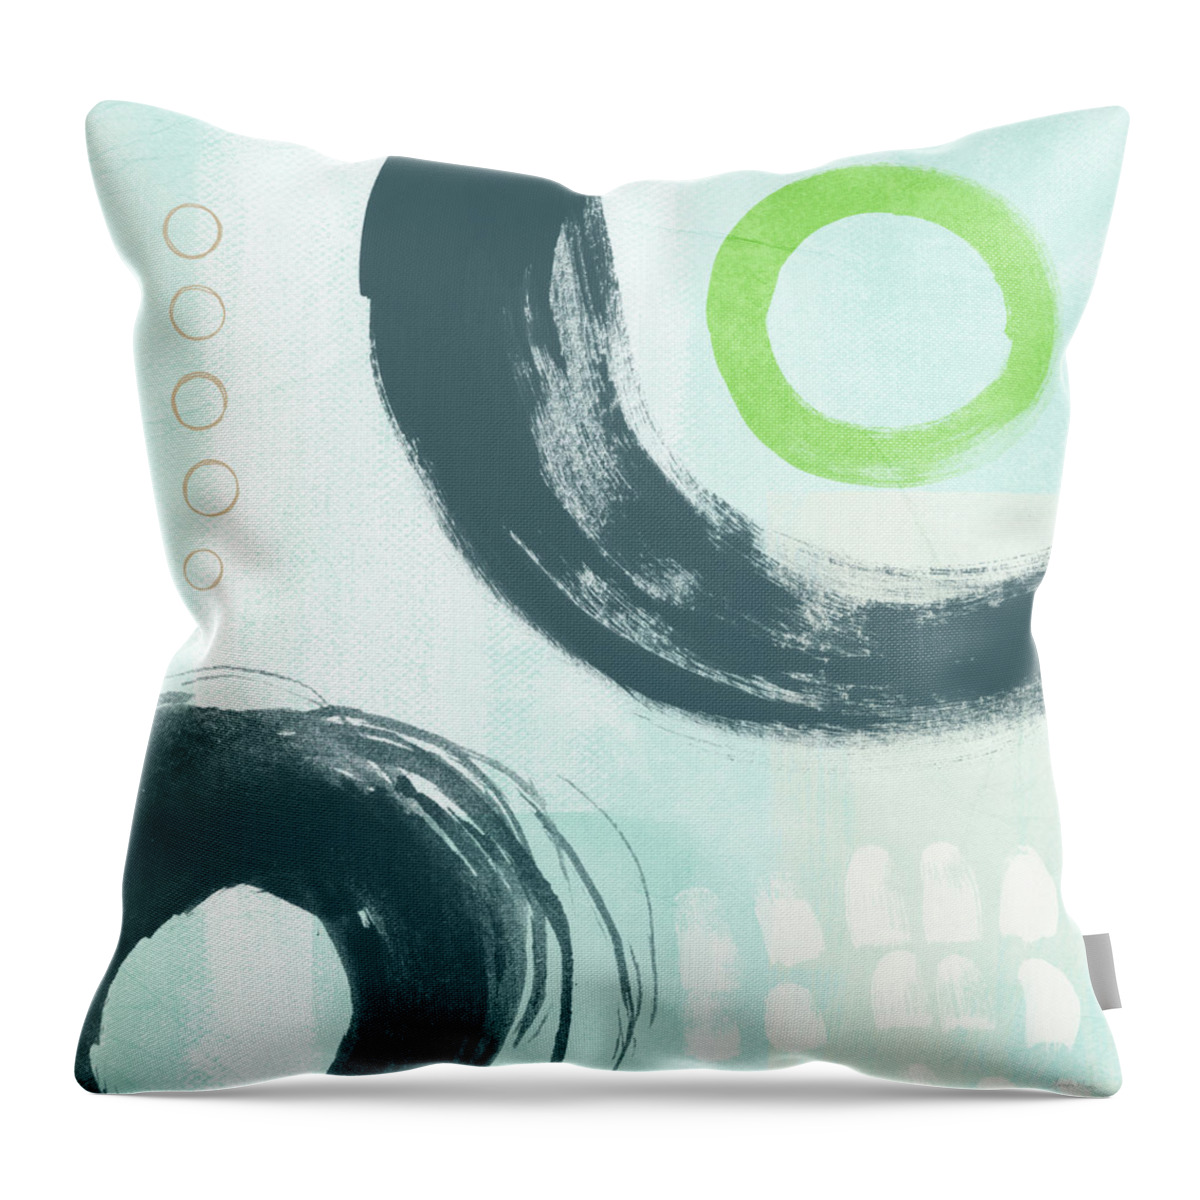 Abstract Throw Pillow featuring the painting Blue Circles 3- Art by Linda Woods by Linda Woods